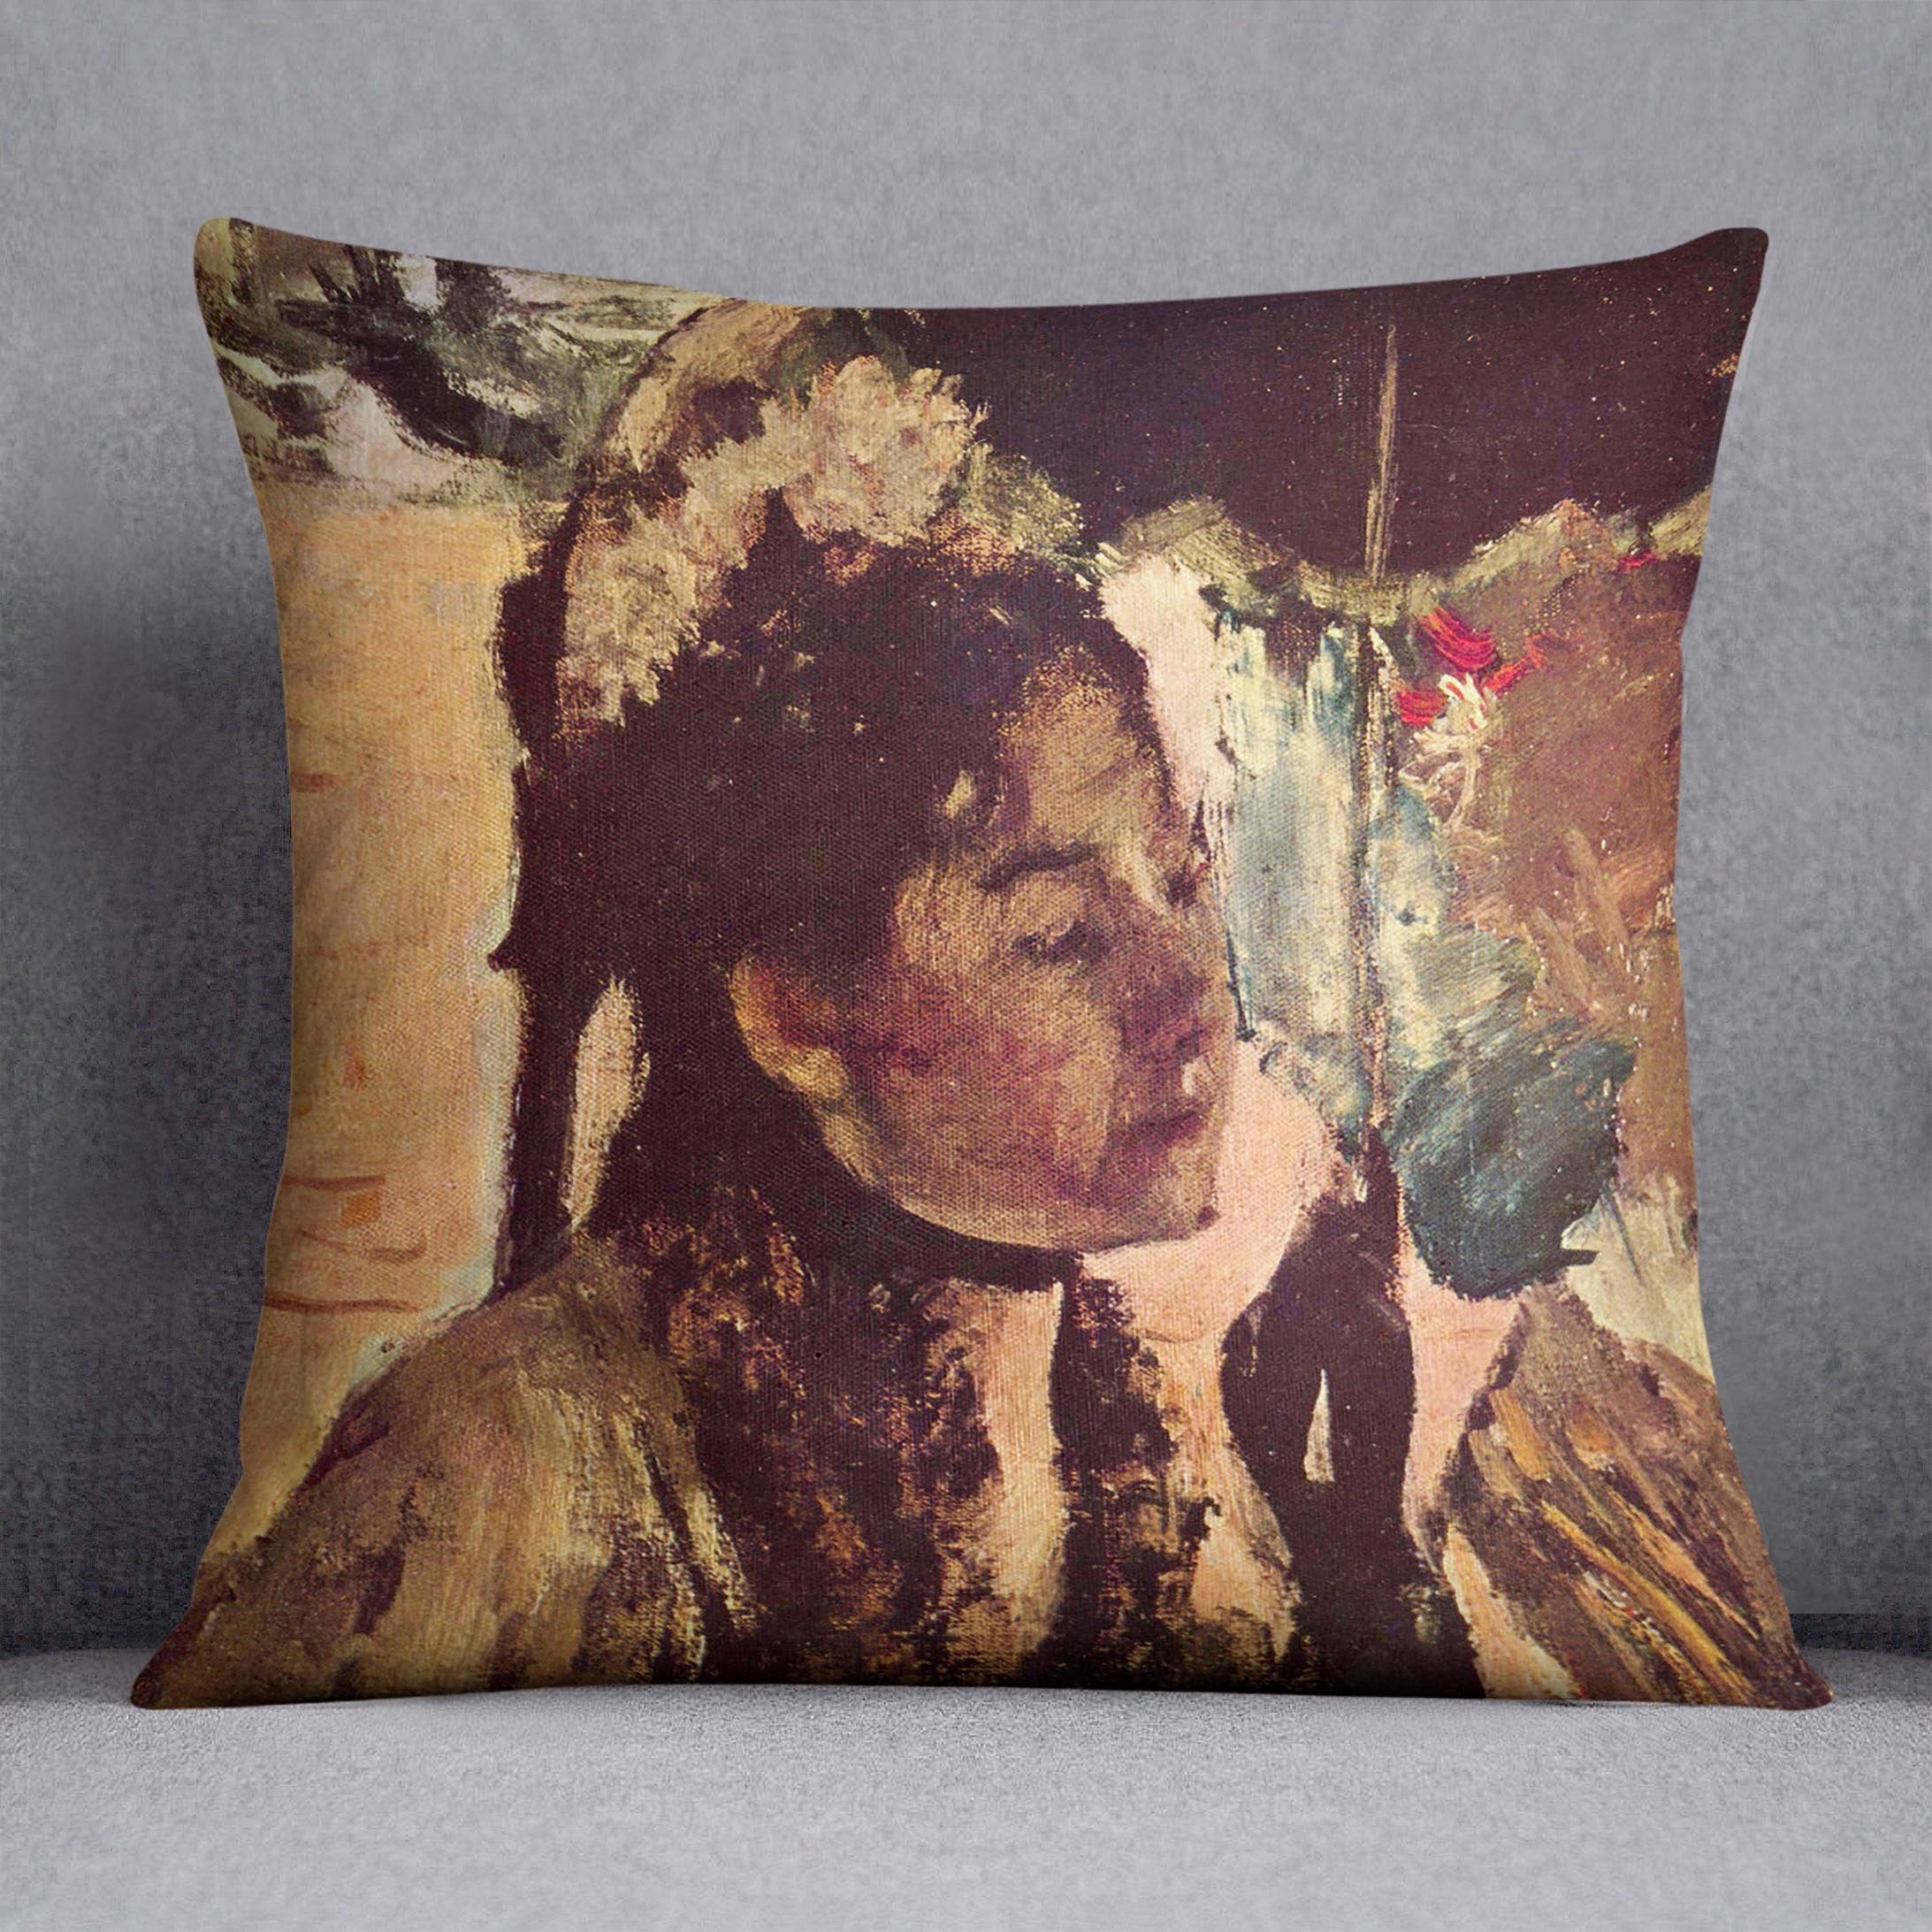 In the Tuileries Woman with Parasol by Degas Cushion